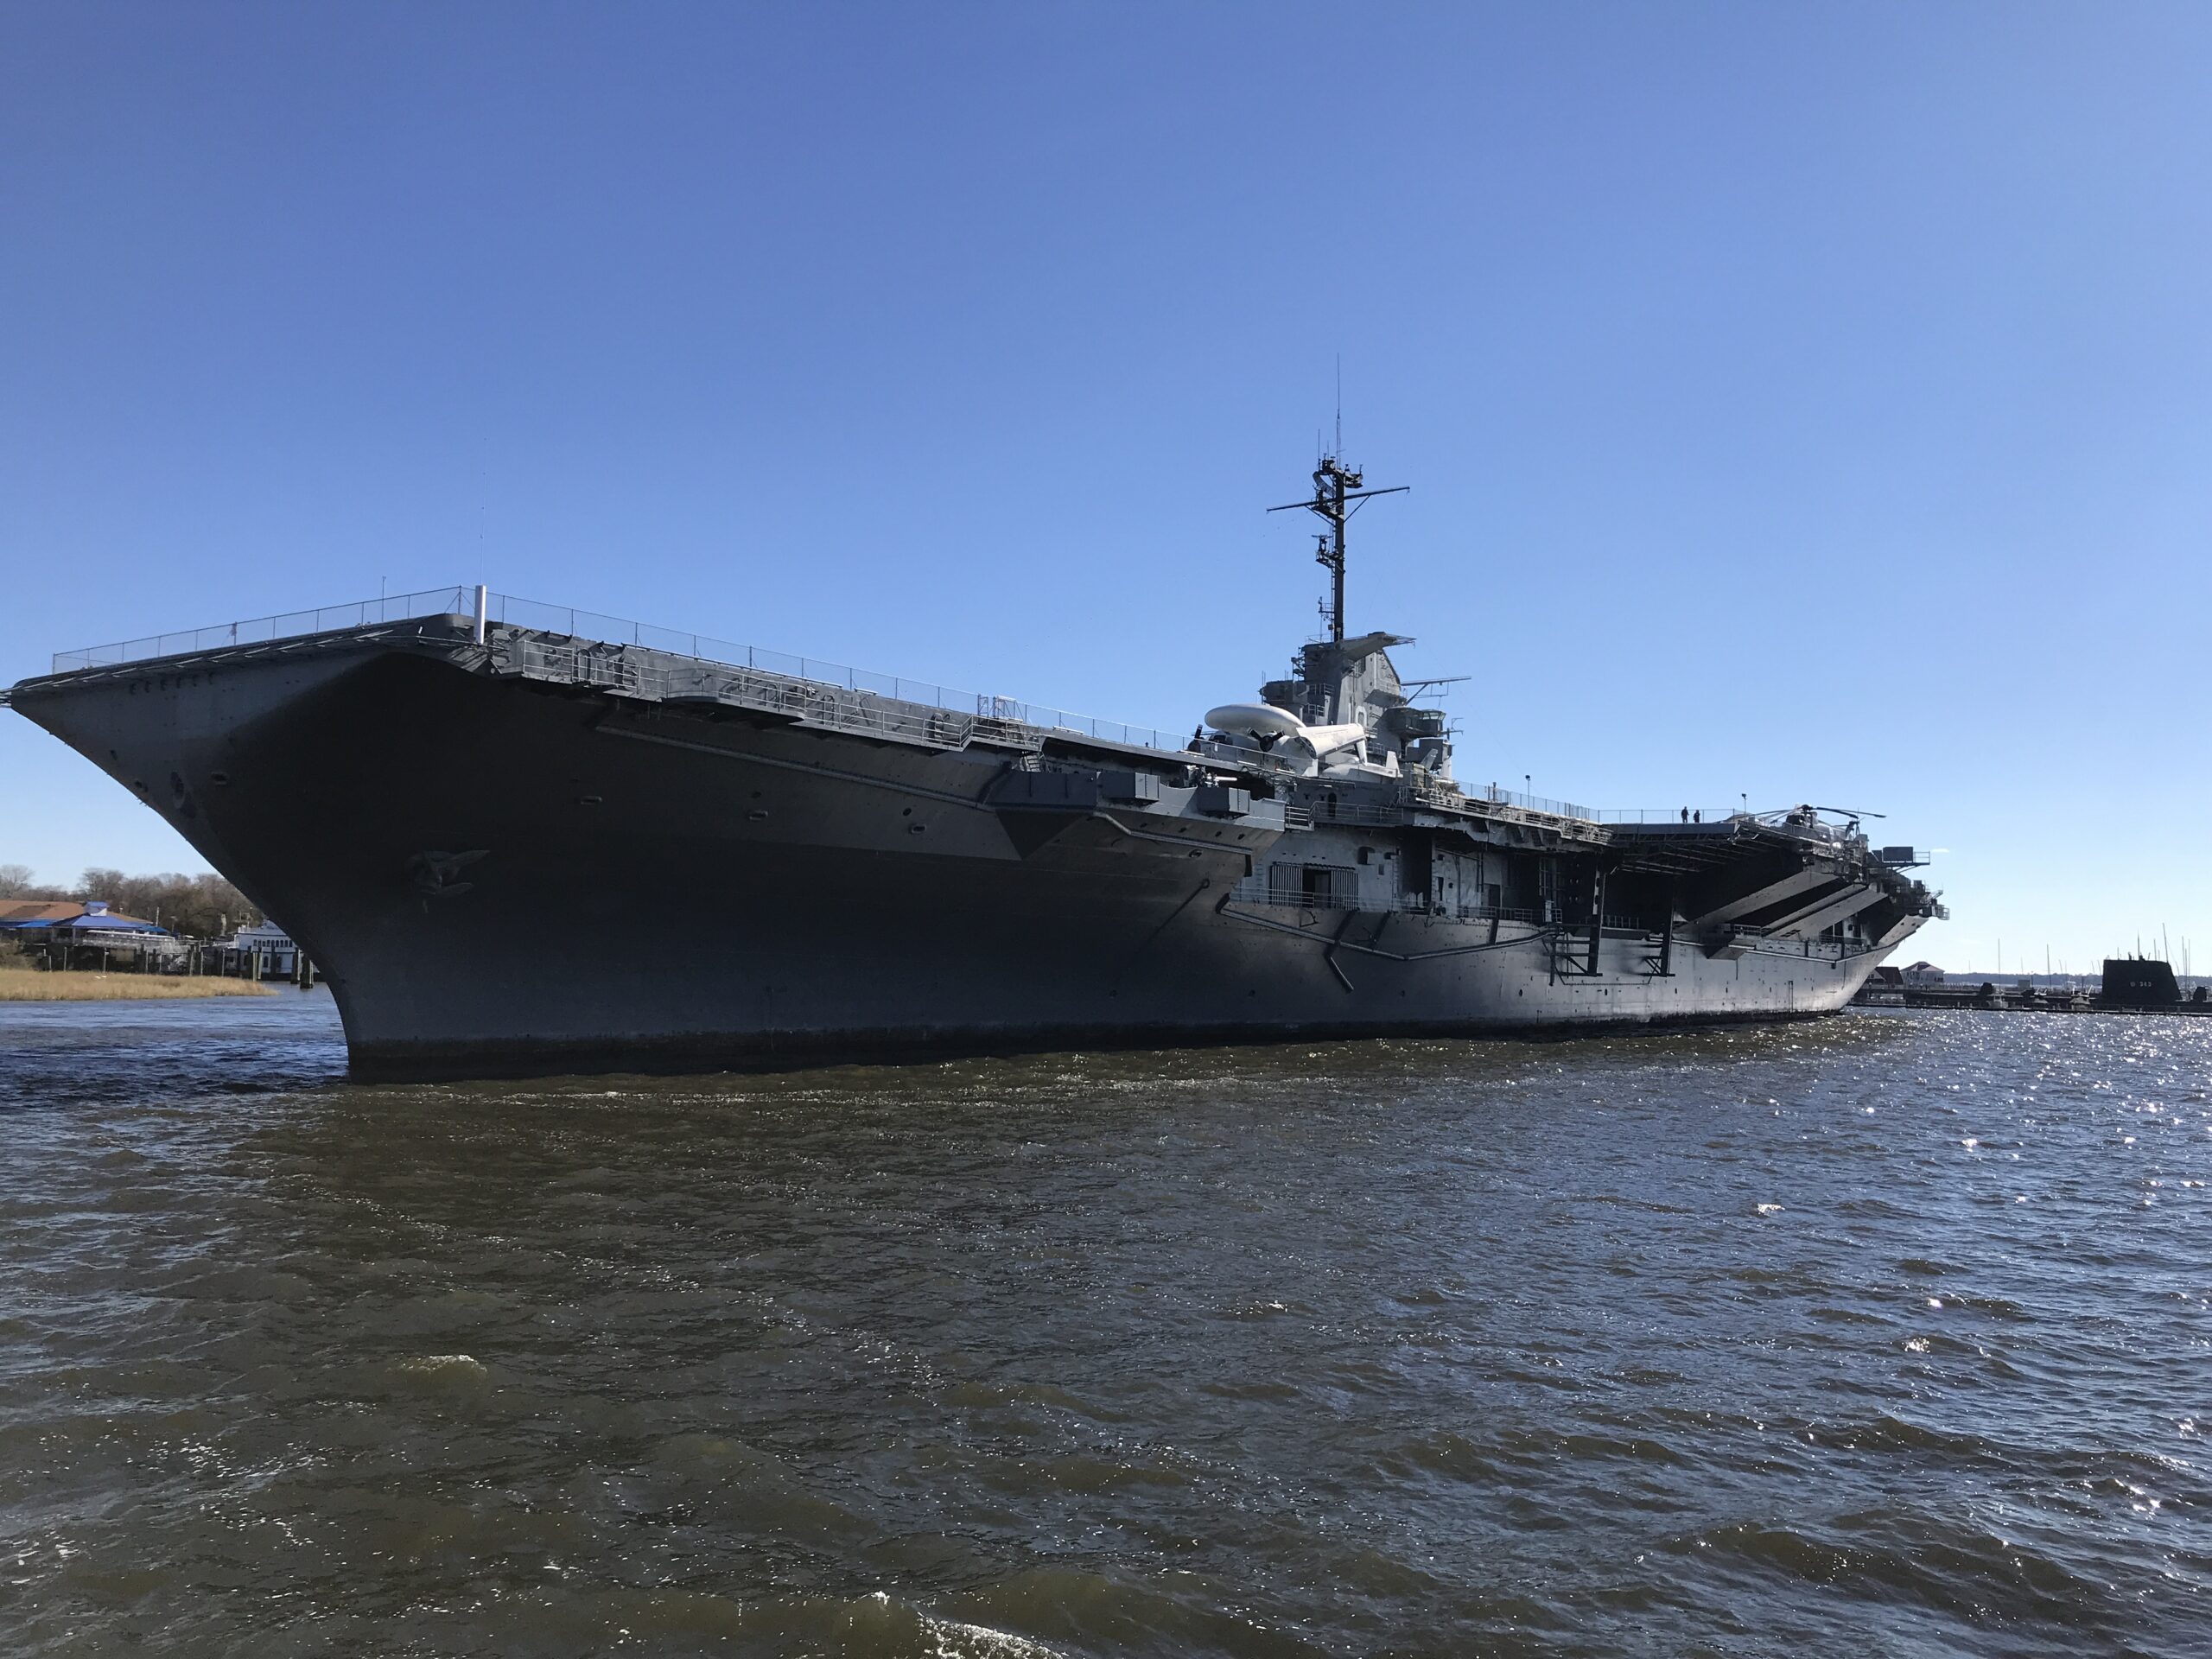 Charleston SC – Aircraft Carrier Yorktown and Fort Sumter